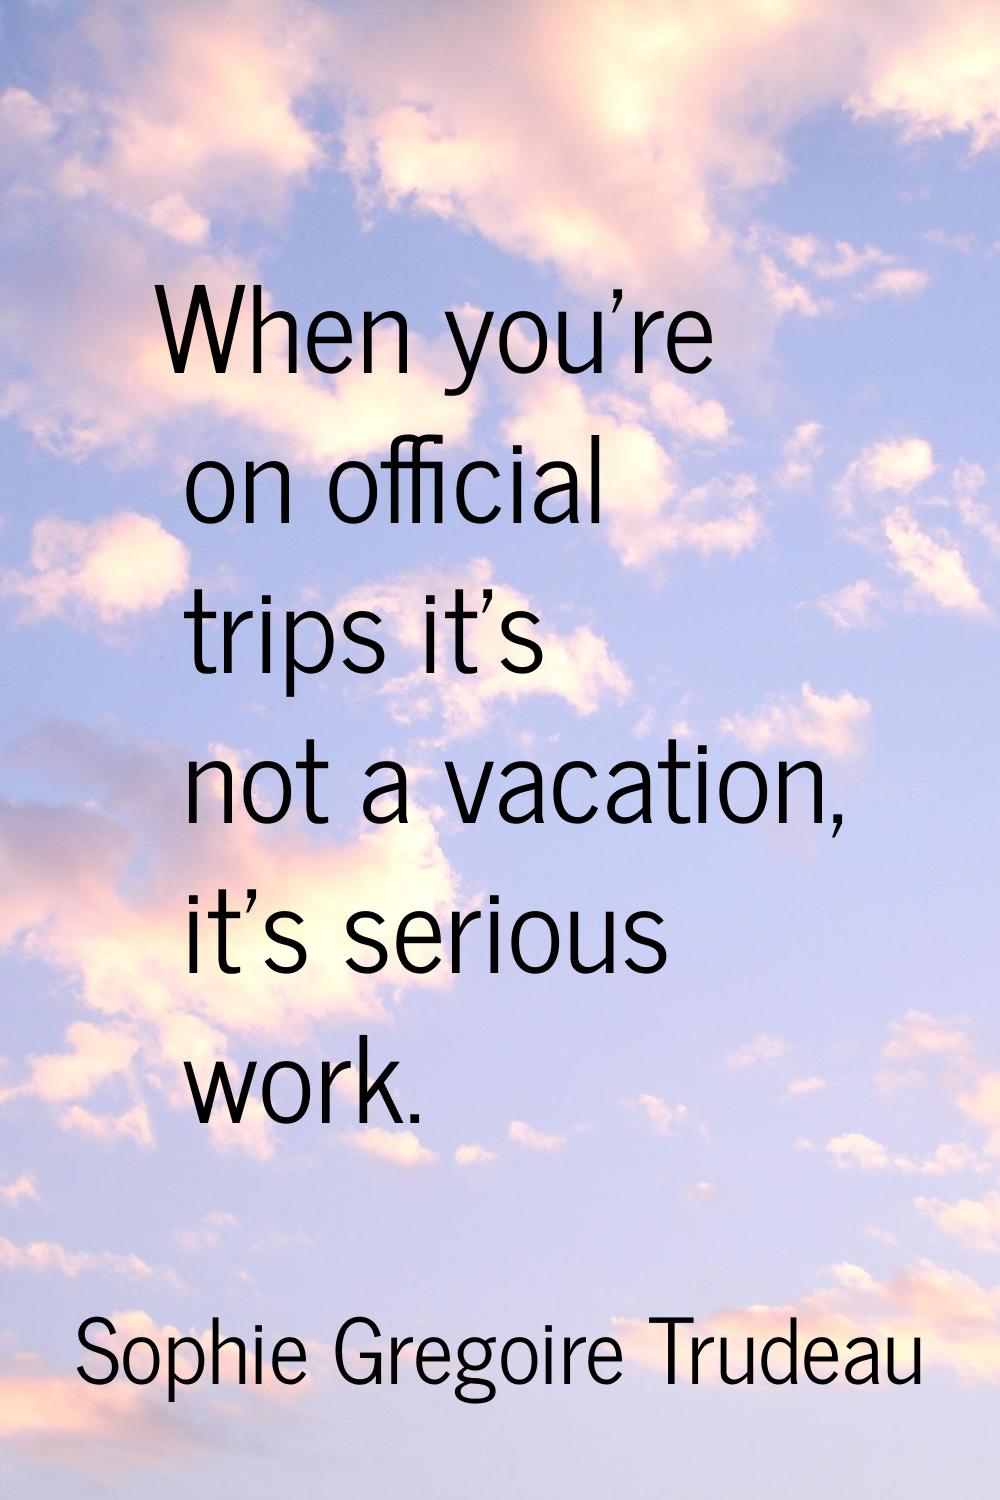 When you're on official trips it's not a vacation, it's serious work.